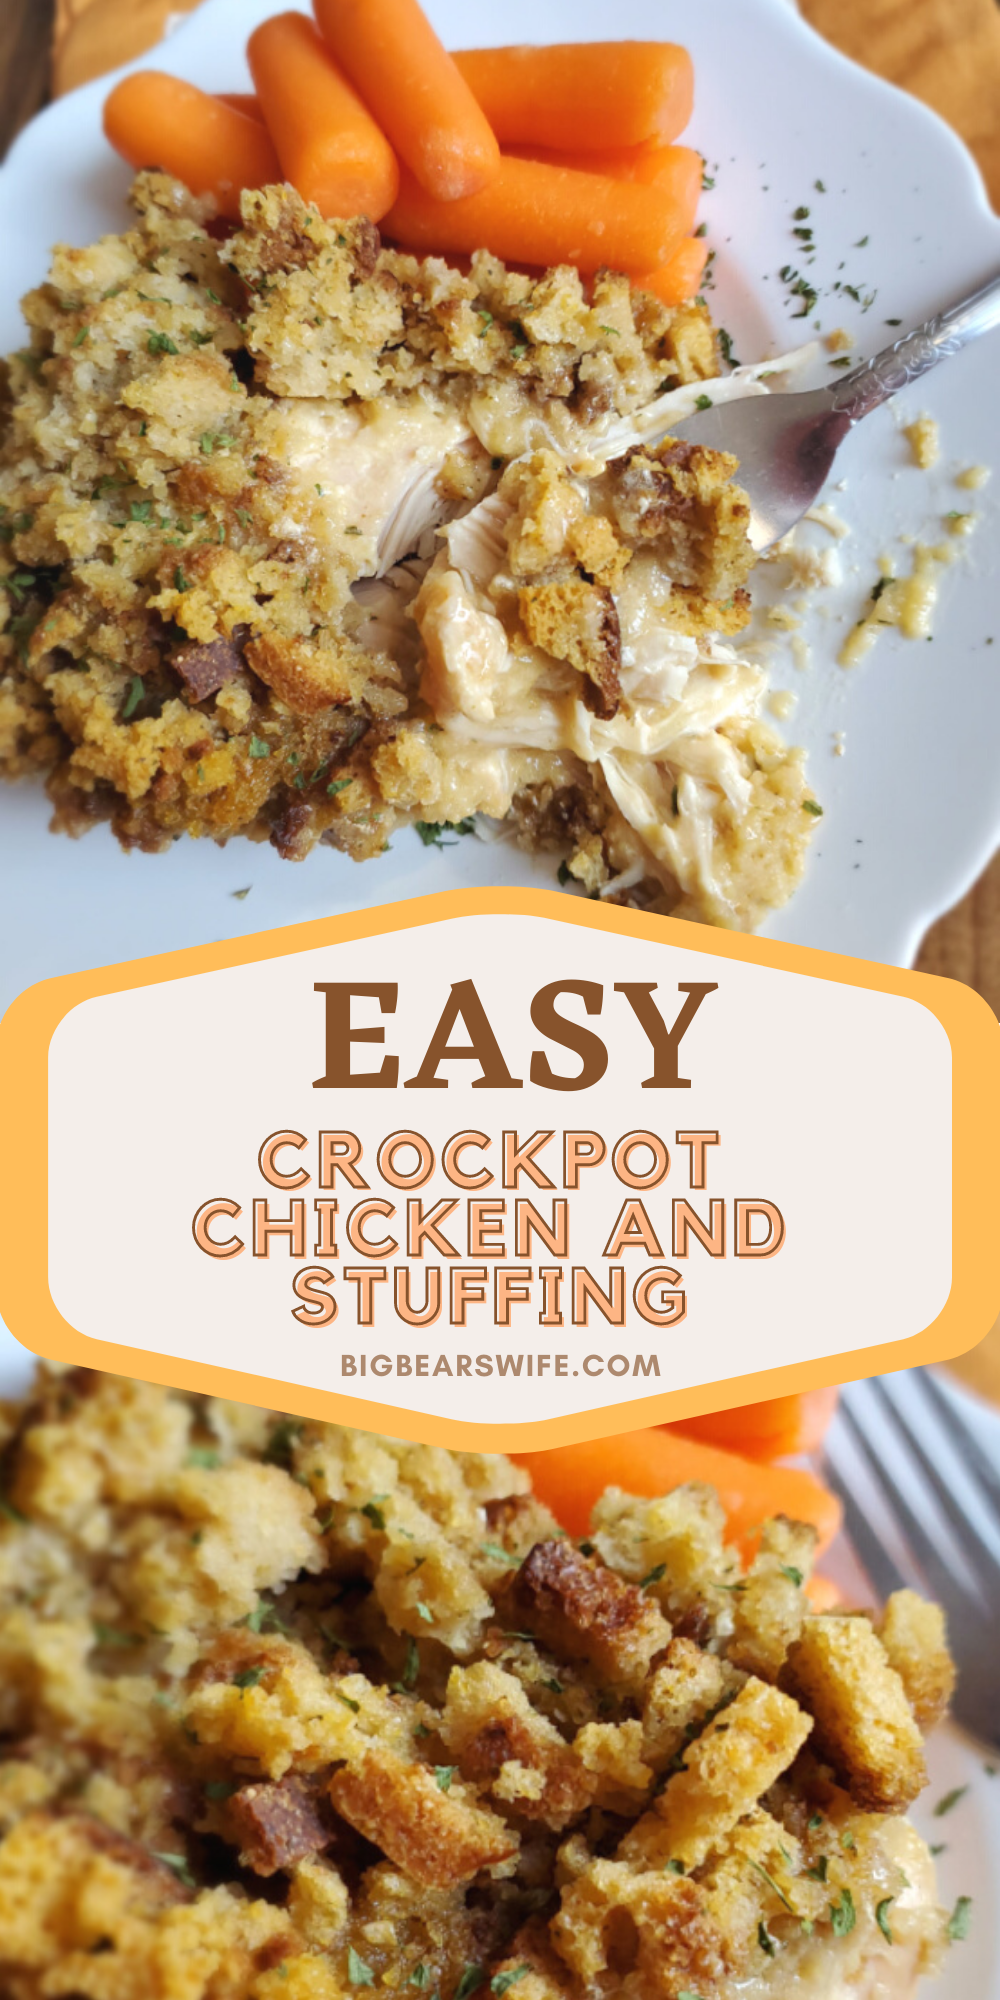 This Slow Cooker Crockpot Chicken and Stuffing recipe reminds me of a meal that my mom would have made when I was growing up! Toss a few easy ingredients into the slow cooker and dinner will be ready without much work at all! This 1980s Slow Cooker Chicken and Stuffing only takes about 5 minutes to toss together! 

 via @bigbearswife